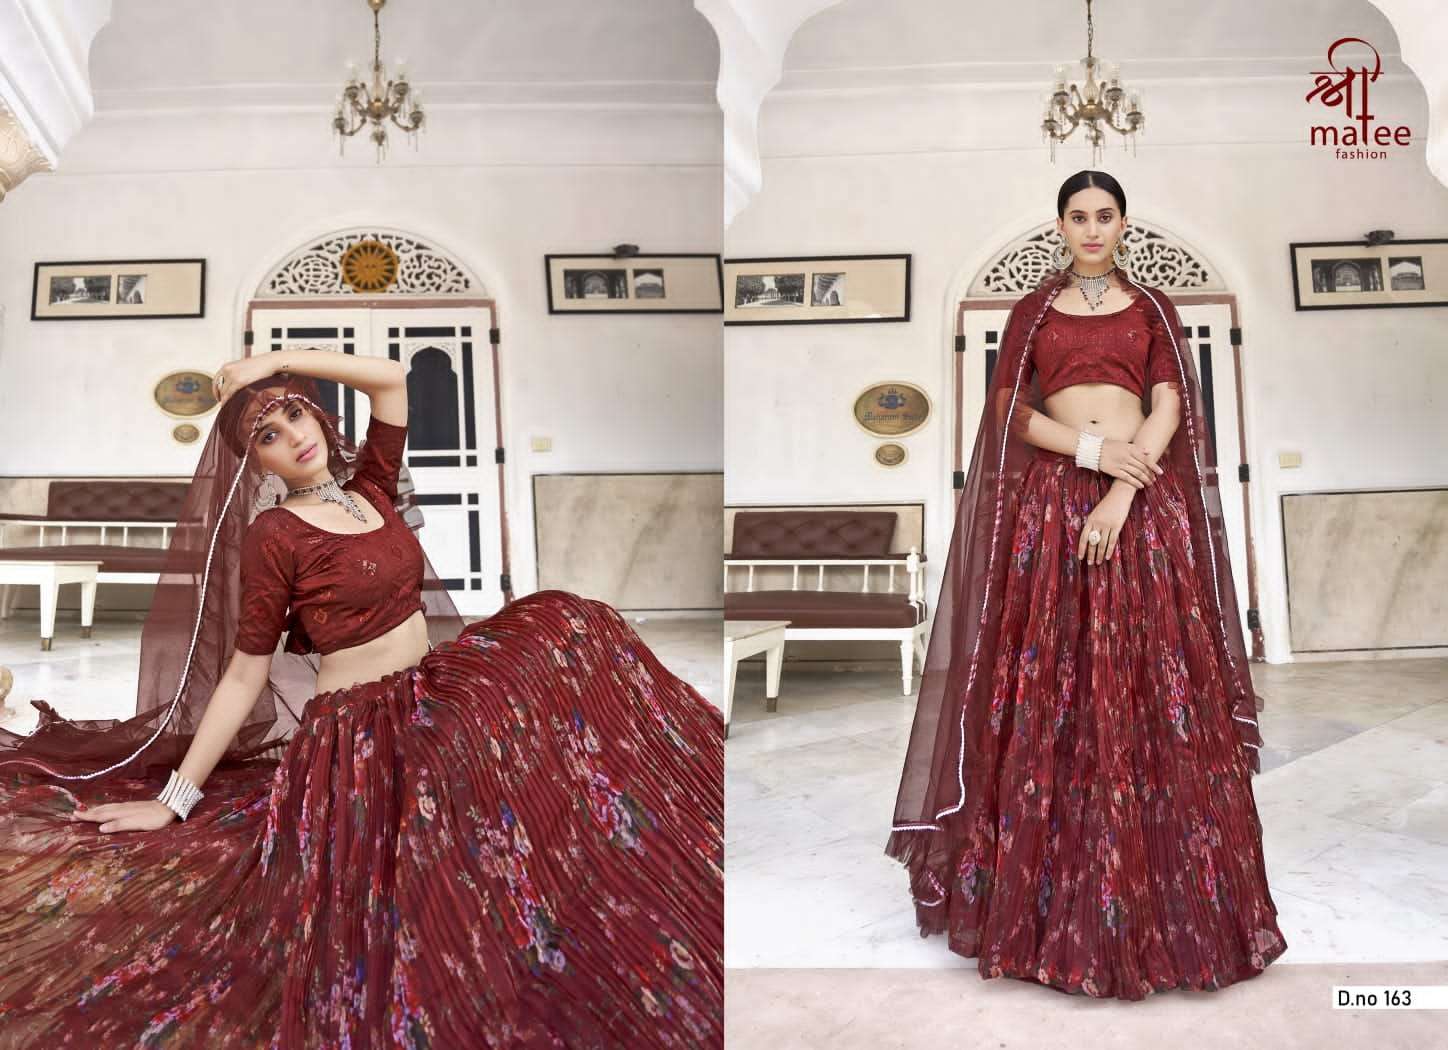 Rosy By Shree Matee Fashion 162 To 164 Series Designer Beautiful Navratri Collection Occasional Wear & Party Wear Heavy Organza Lehengas At Wholesale Price